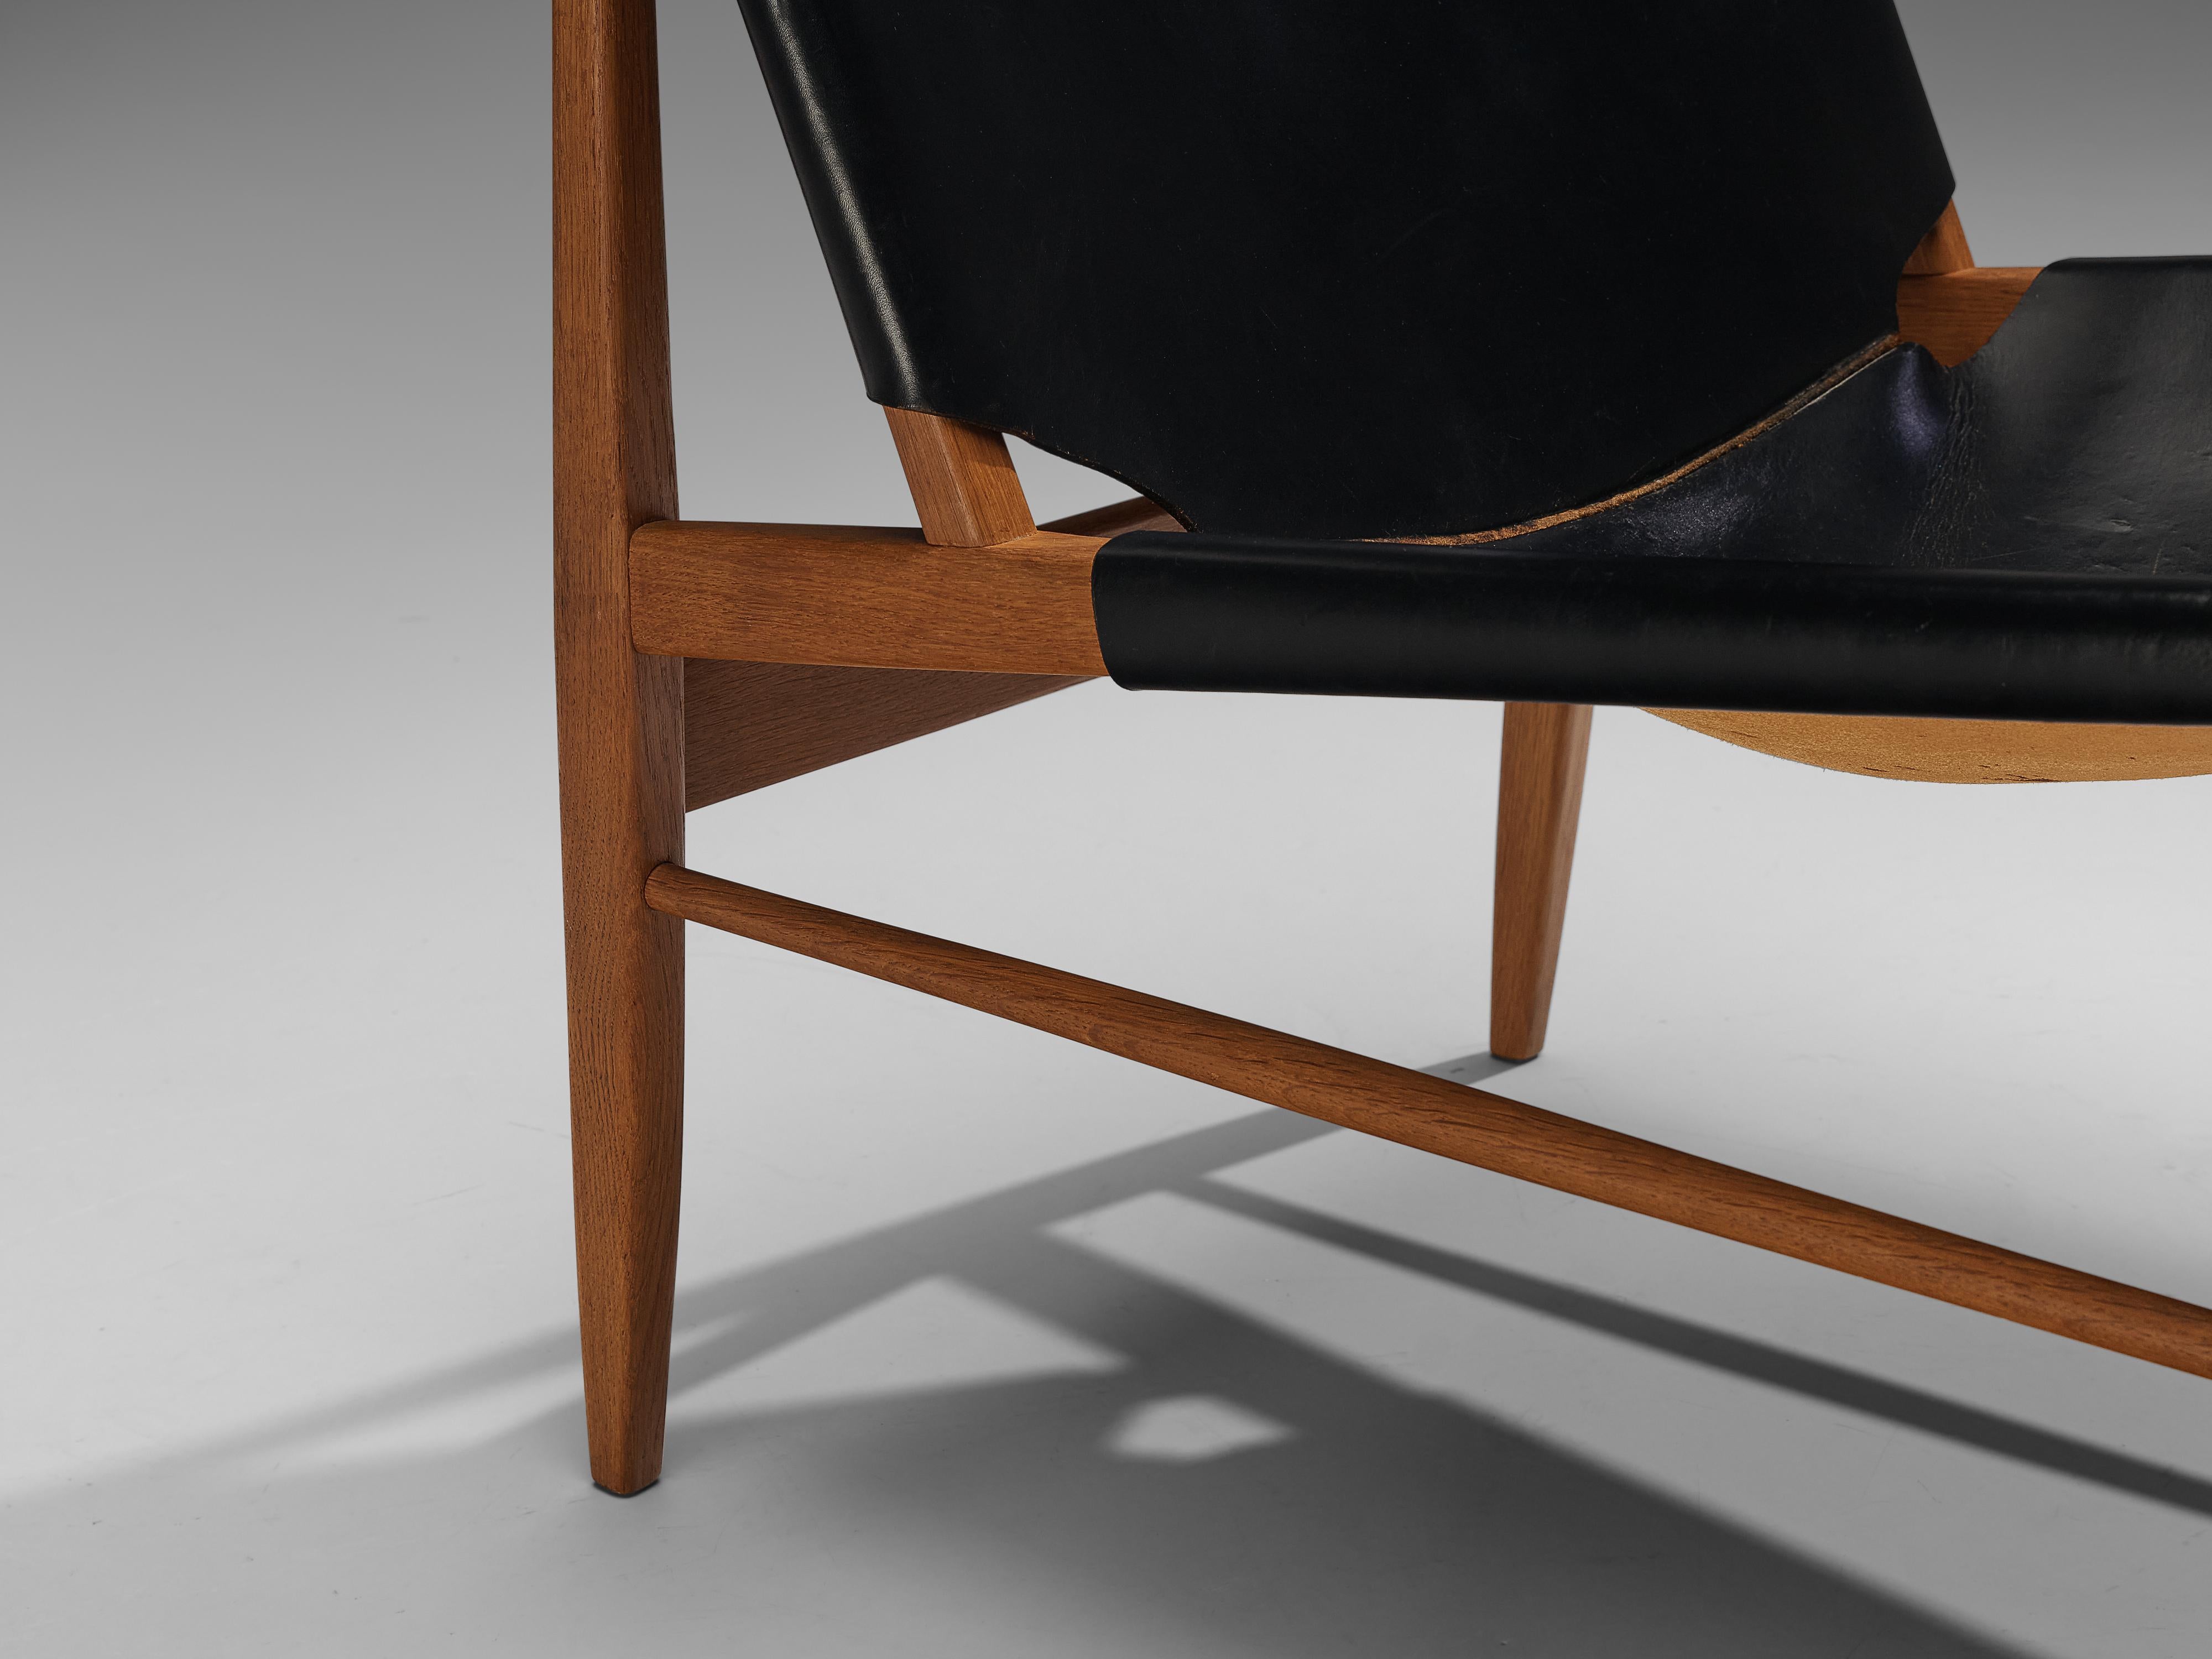 Mid-20th Century Franz Xaver Lutz 'Chimney' Lounge Chair Model 1192 in Black Original Leather